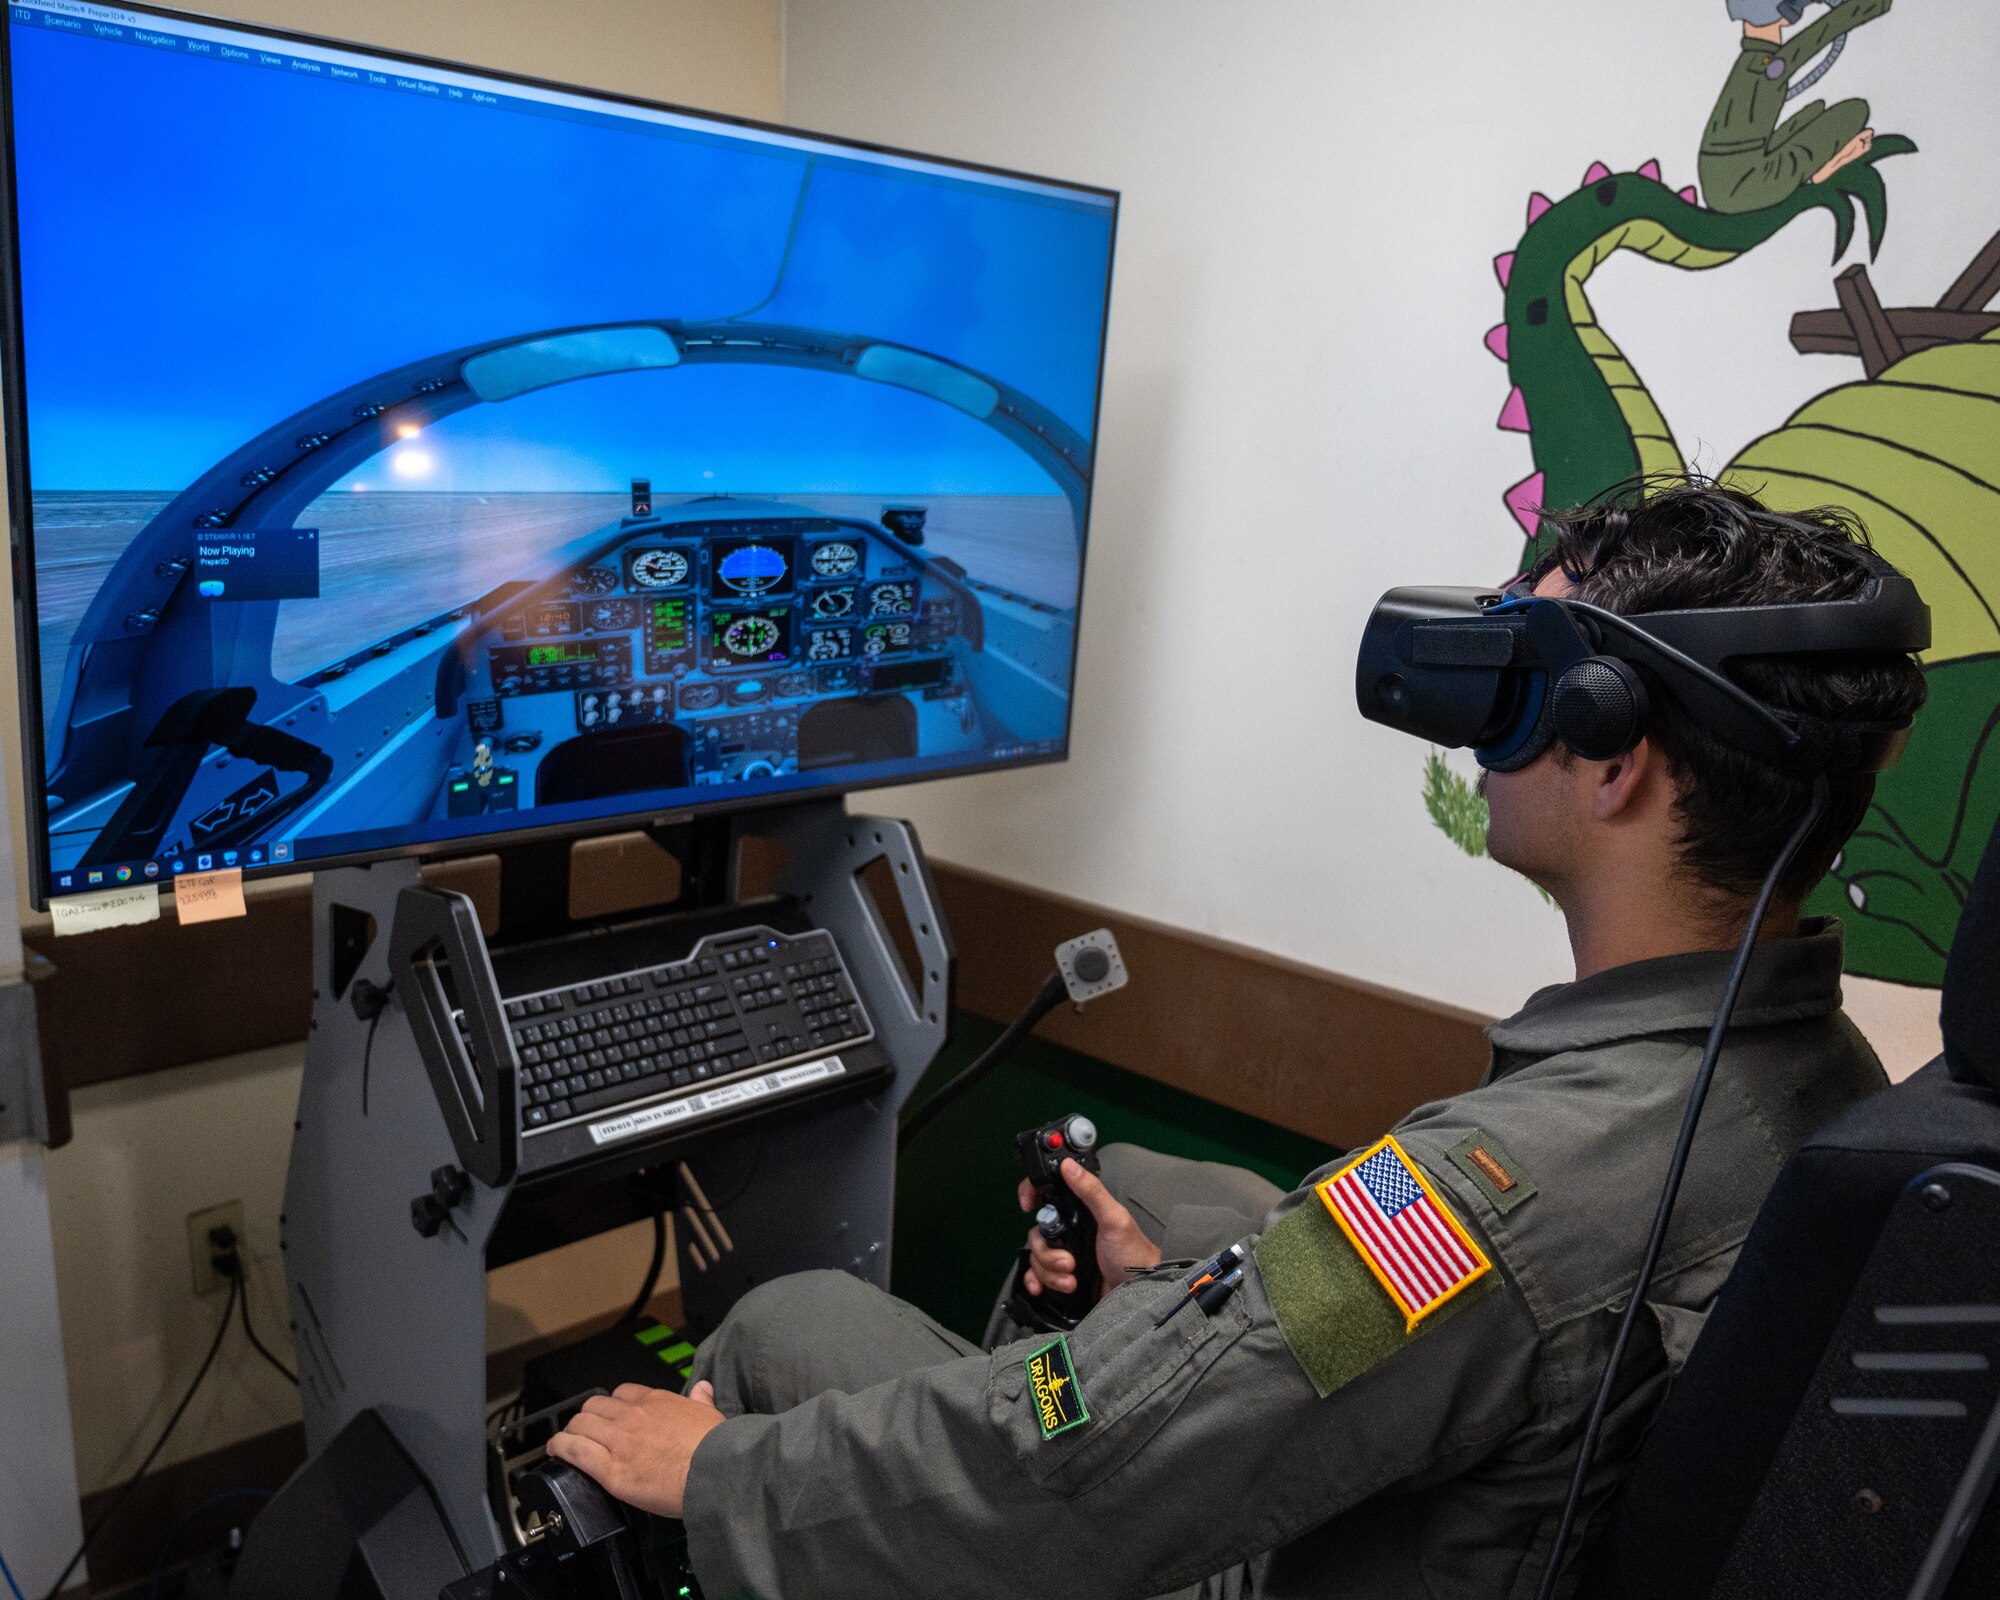 U.S. Air Force 2nd Lt. Christian Lobiondo, 47th Student Squadron student pilot, takes off in a T-6 Texan II in virtual reality at Laughlin Air Force Base, Texas, July 20, 2023. VR units have been installed into classrooms at Laughlin, allowing students to rapidly practice lessons taught earlier. (U.S. Air Force photo by Senior Airman Nicholas Larsen)